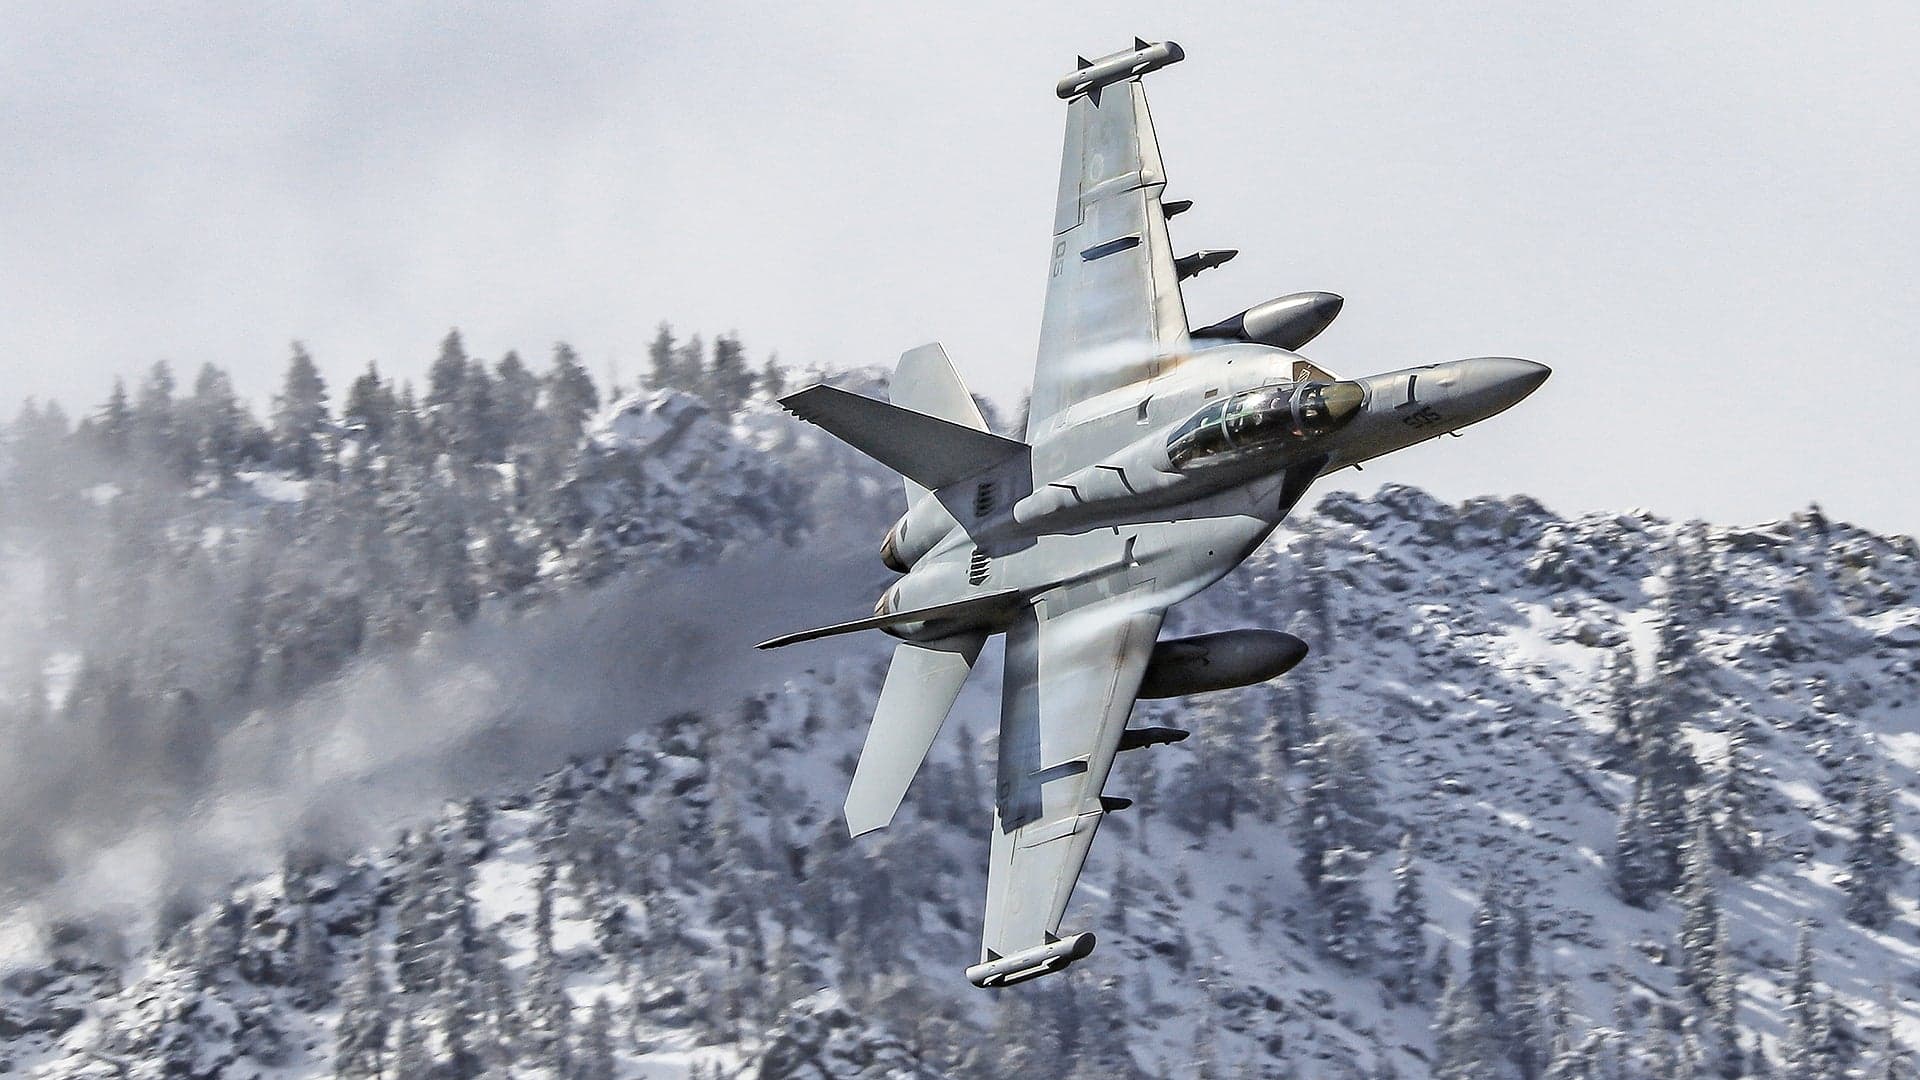 Photographer Hikes Sequoia National Forest To Get Insane Shots Of Fighter Jets Blasting By